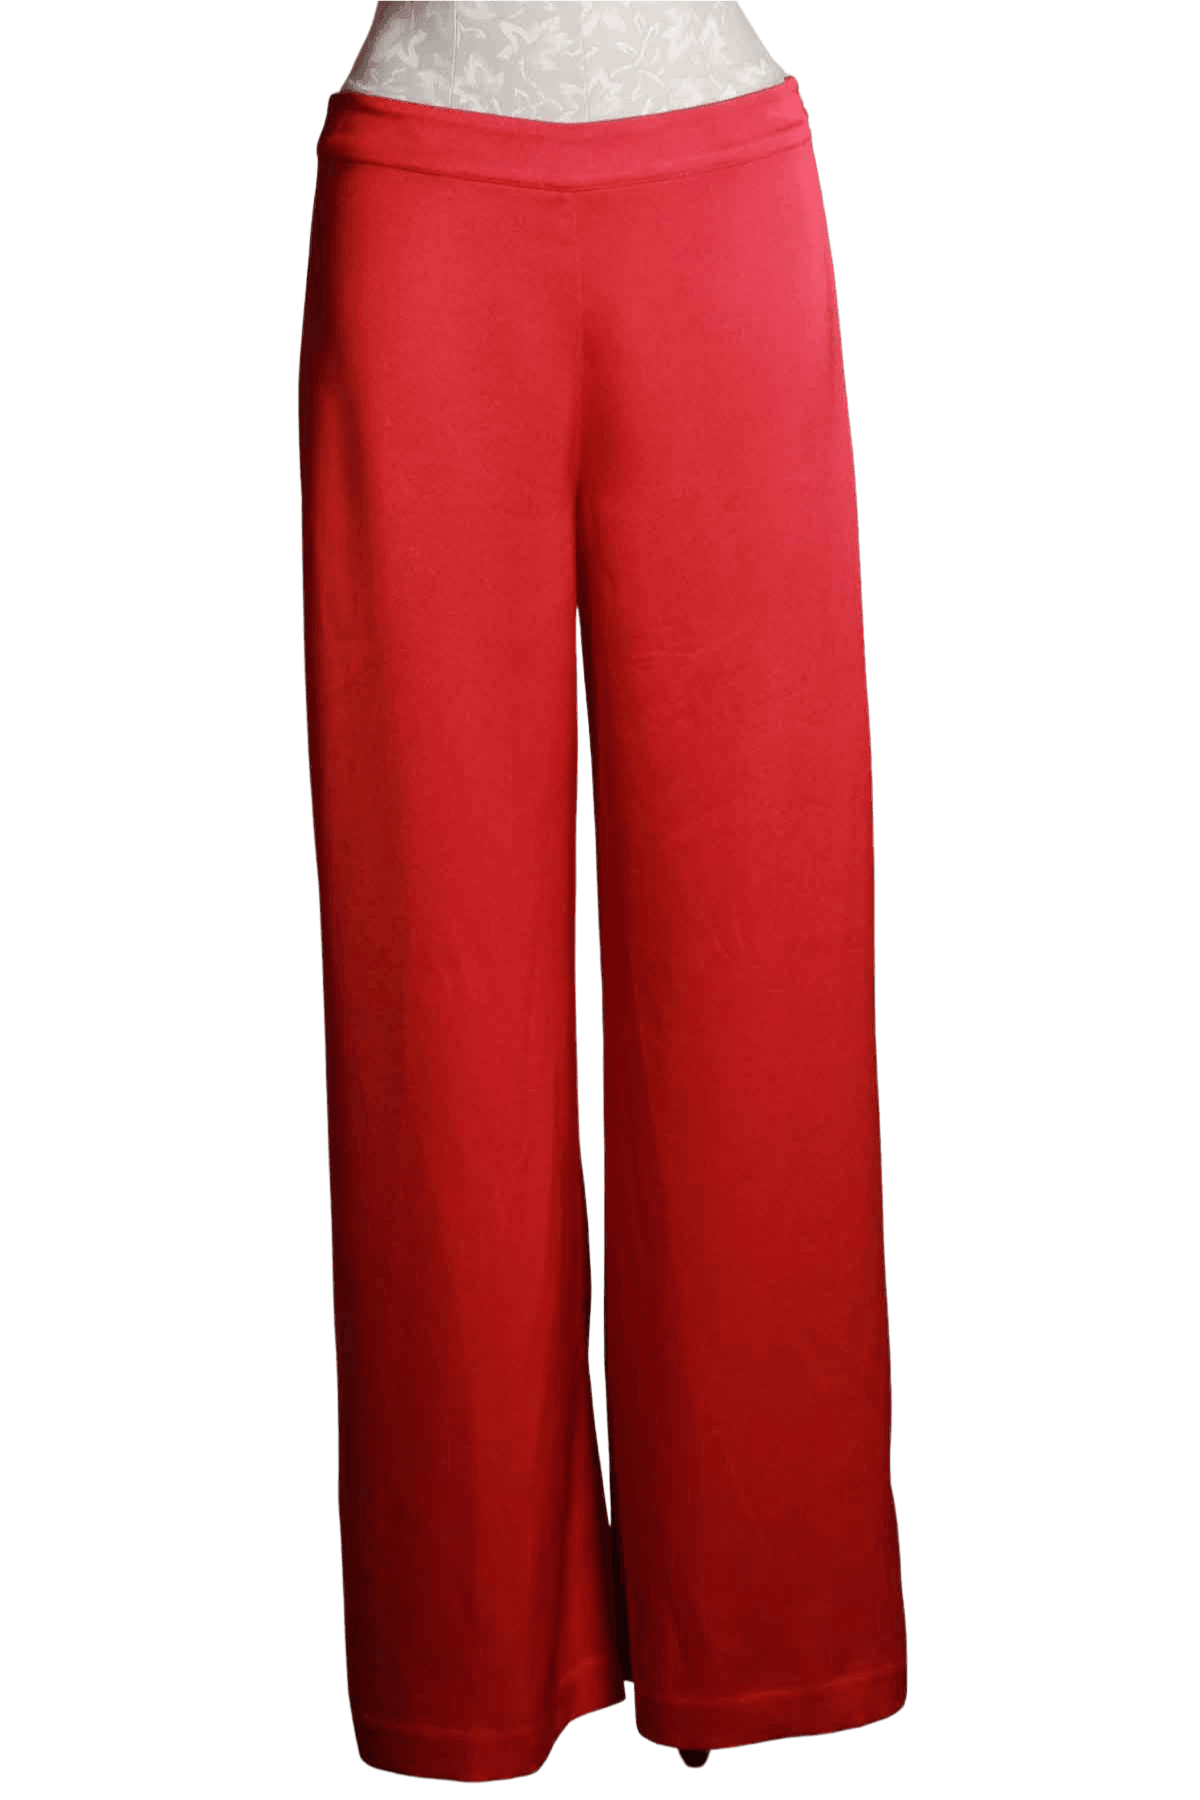 ribbon red wide leg satin pant by Trina Turk with banded waist and concealed side zip